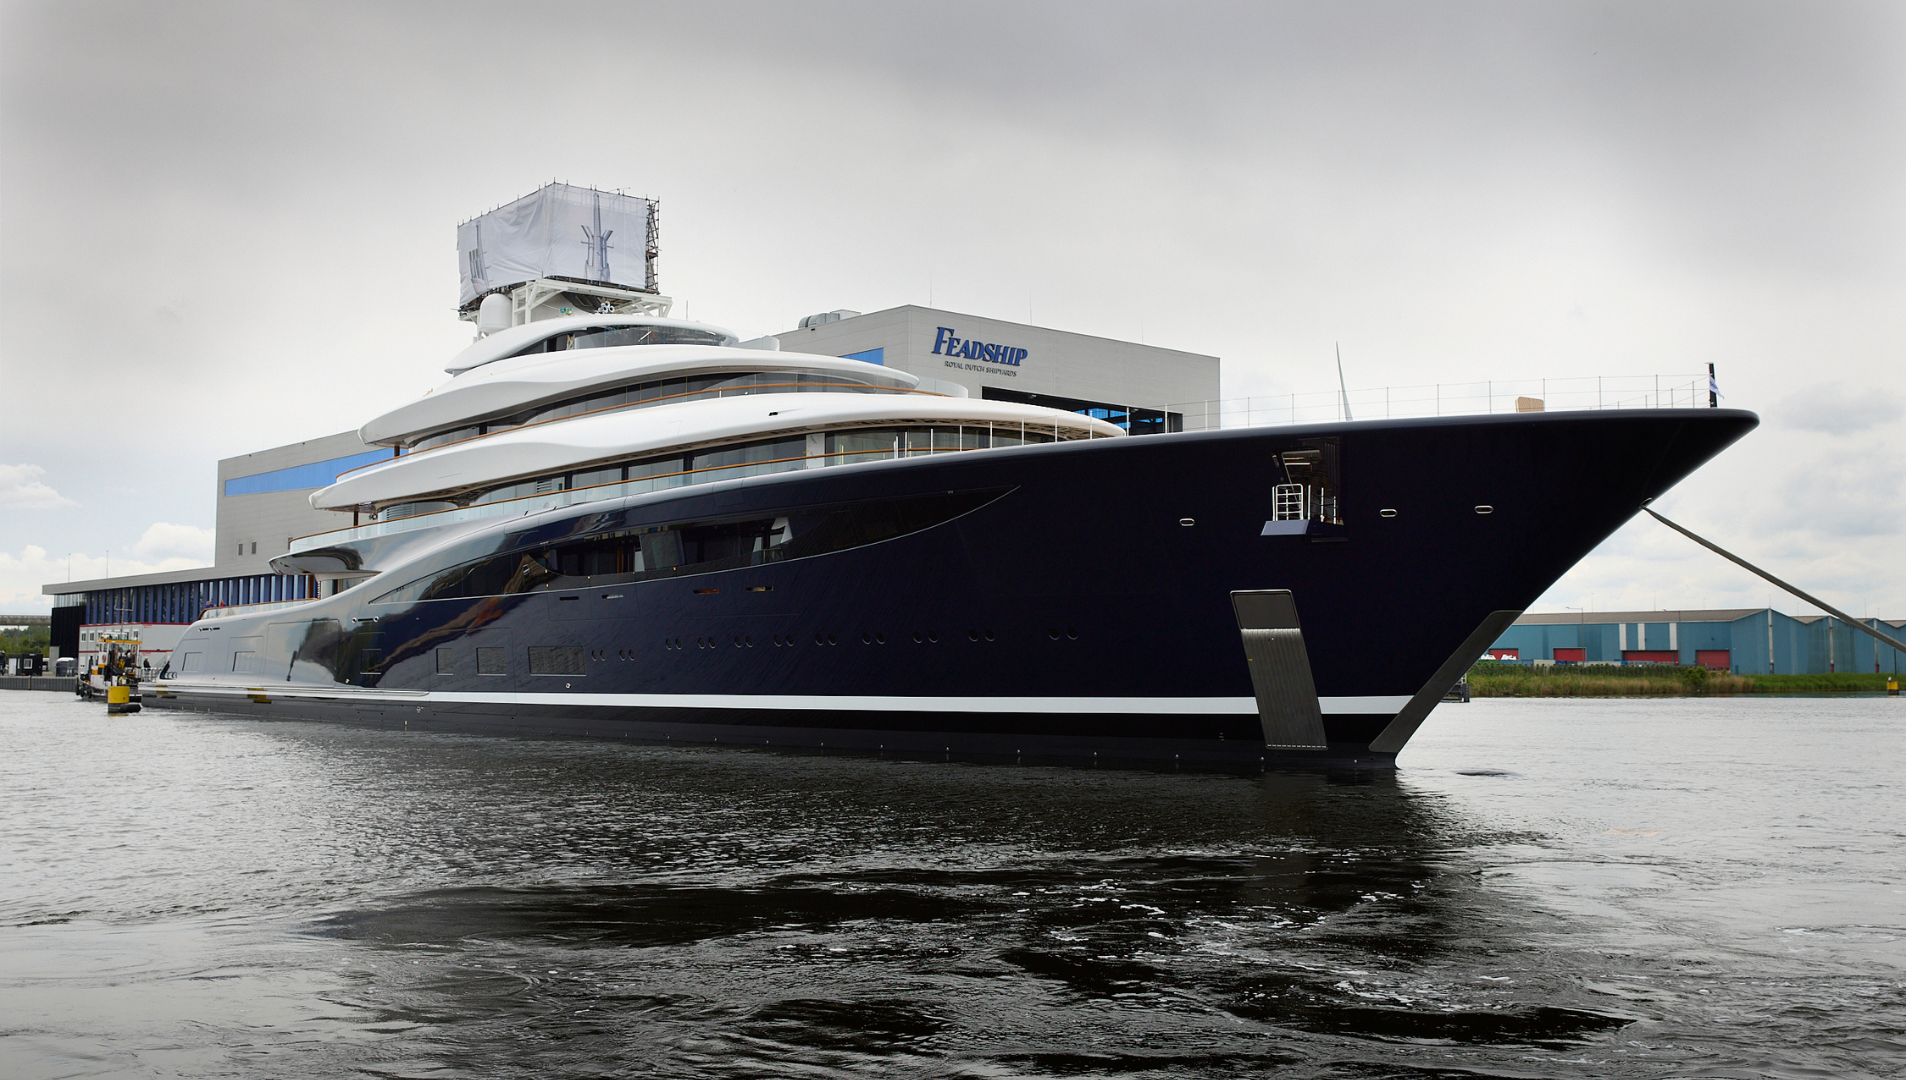 Hydrogen fuel cells promise exceptionally clean power, with water vapor as their sole exhaust. However, one of the most significant hurdles in Project 821’s development was finding a safe and efficient way to store compressed liquid hydrogen (which requires temperatures of -253 degrees Celsius) onboard a luxury yacht. Feadship’s dedication to this project highlights its substantial investment and resolve in finding viable alternatives to traditional fossil fuels.